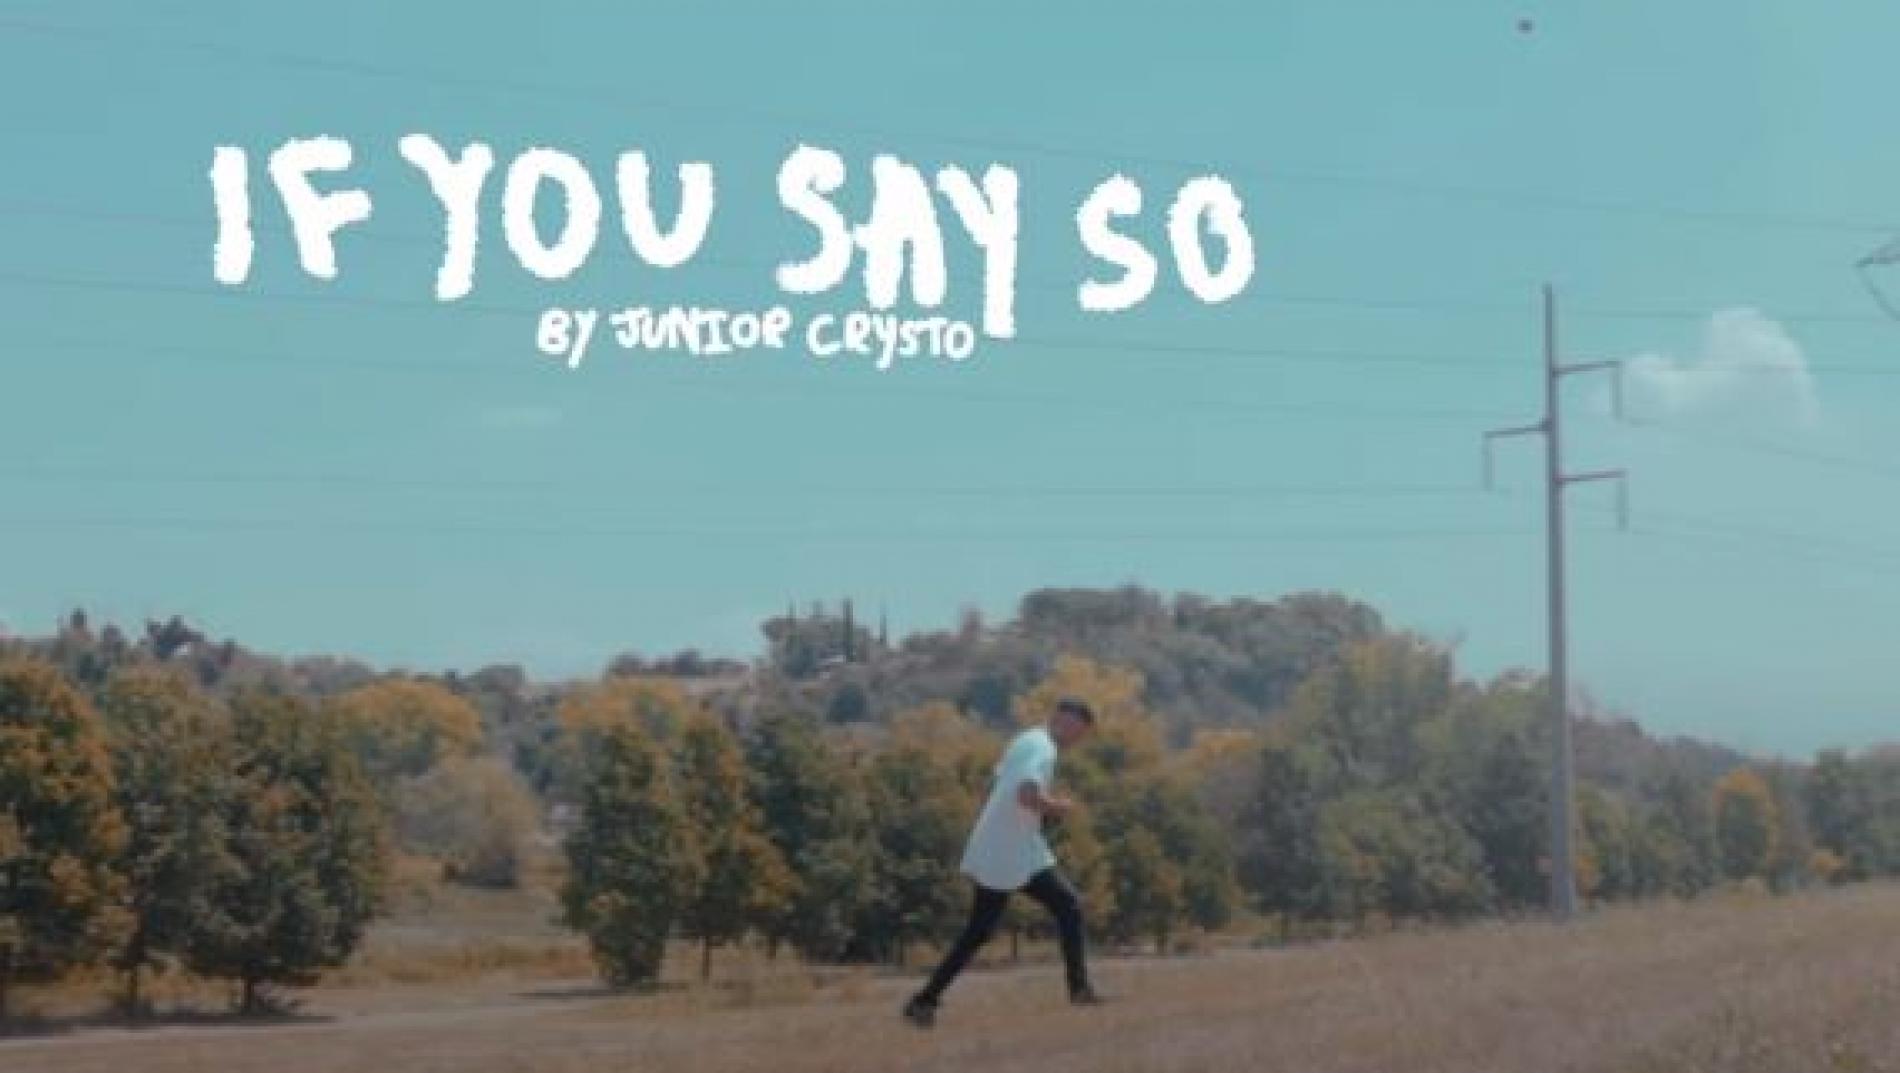 New Music : Junior Crysto – If You Say So